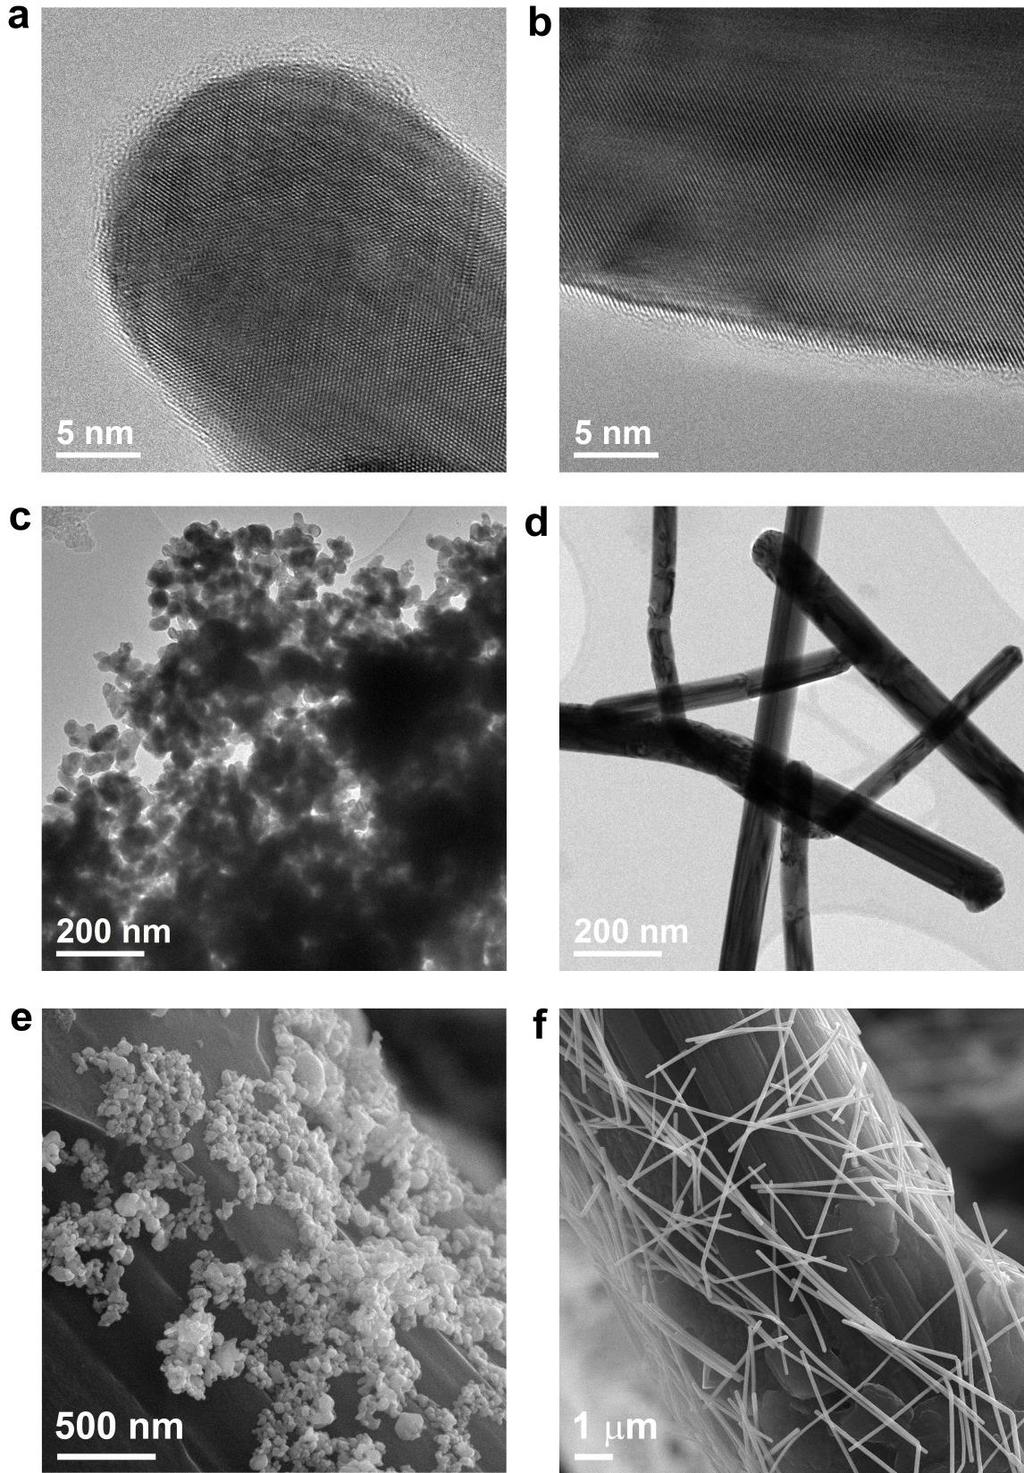 Supplementary Figure 9: HRTEM images of (a) free-standing Ag nanoparticles and (b) freestanding Ag nanowires.